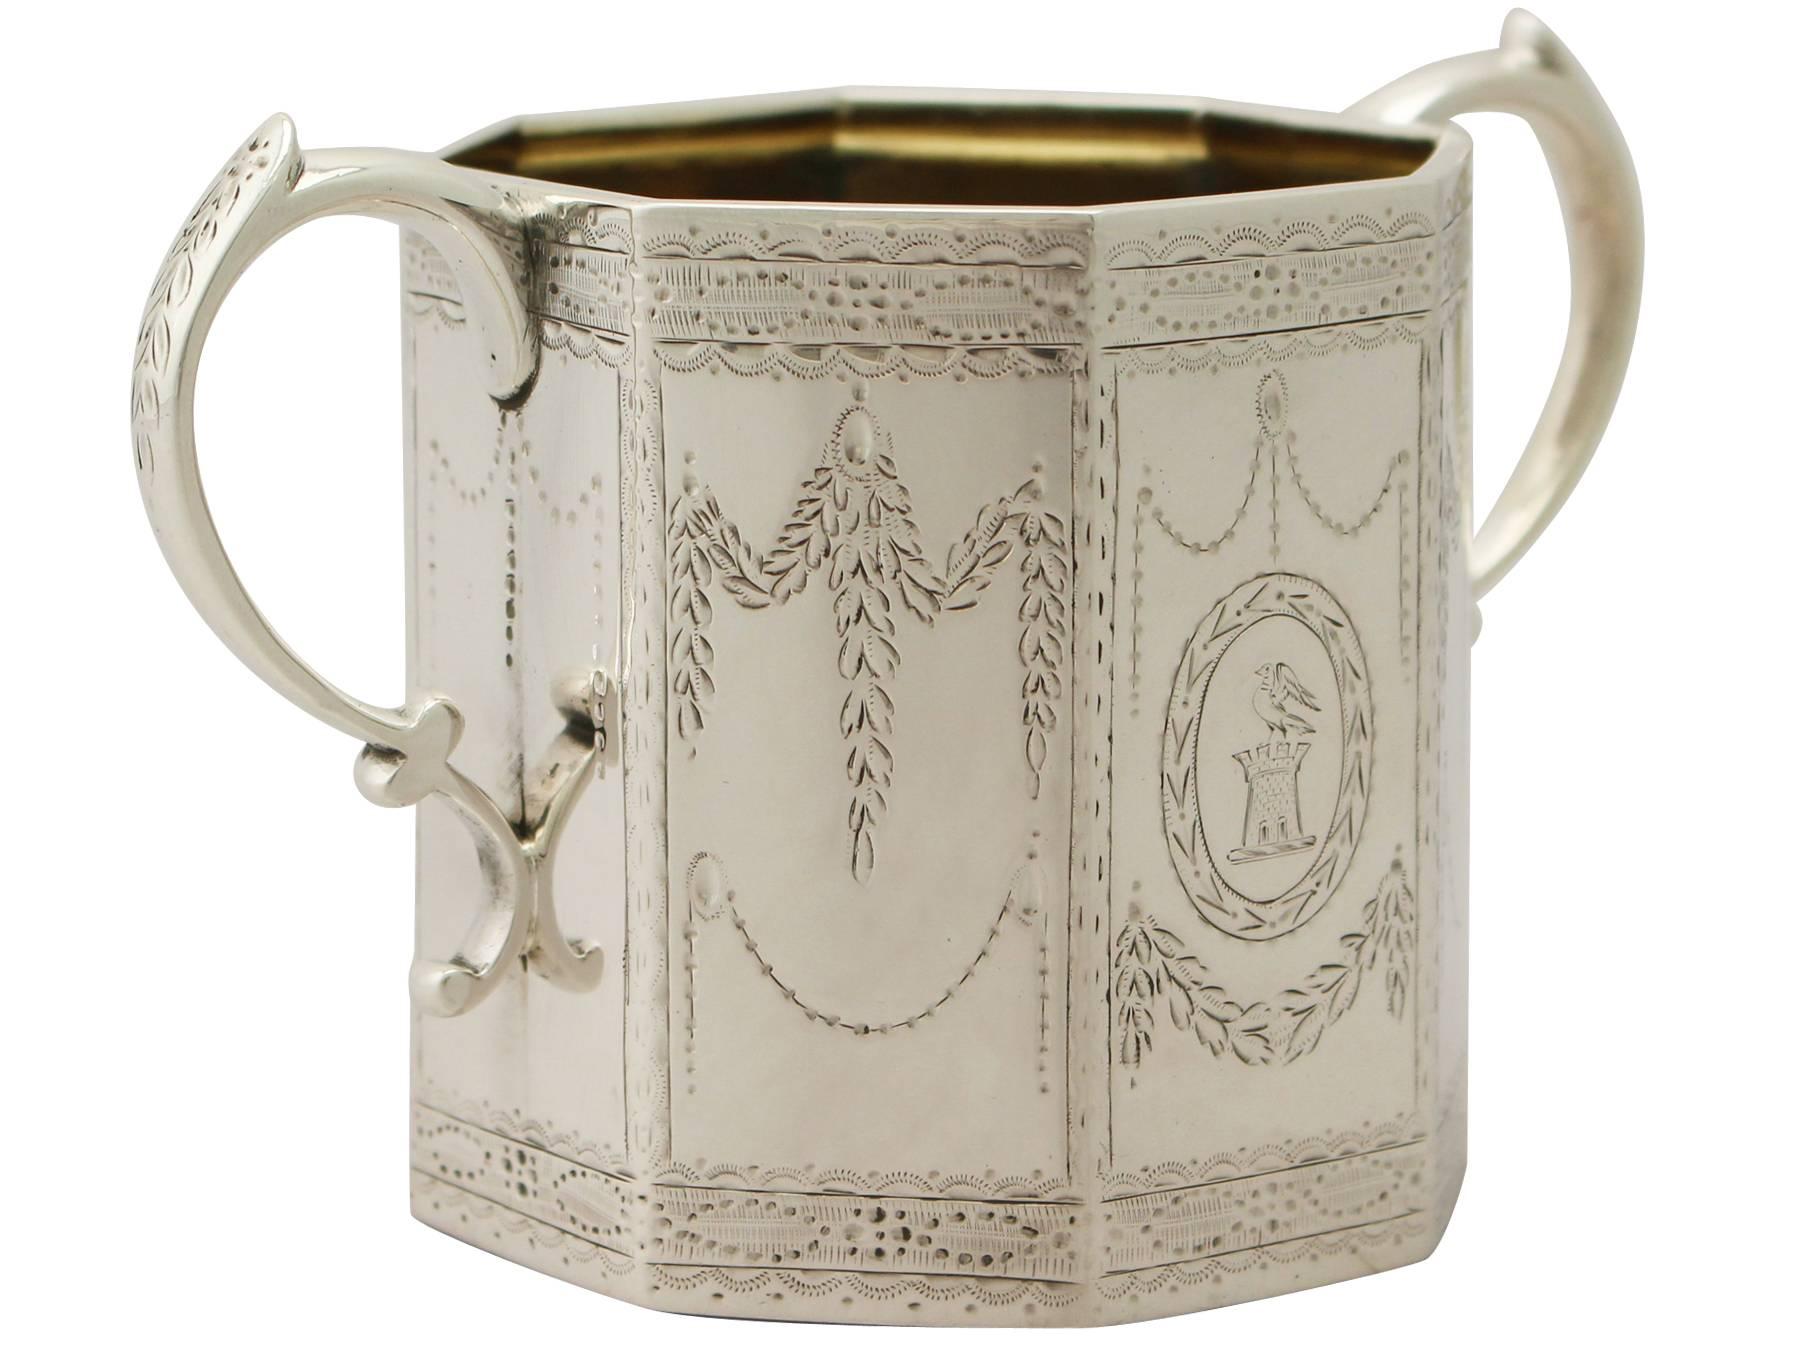 An exceptional, fine and impressive, antique Victorian English sterling silver sugar bowl; an addition to our silver tea ware collection.

This exceptional antique Victorian sterling silver sugar bowl has an octagonal panelled form.

The body of